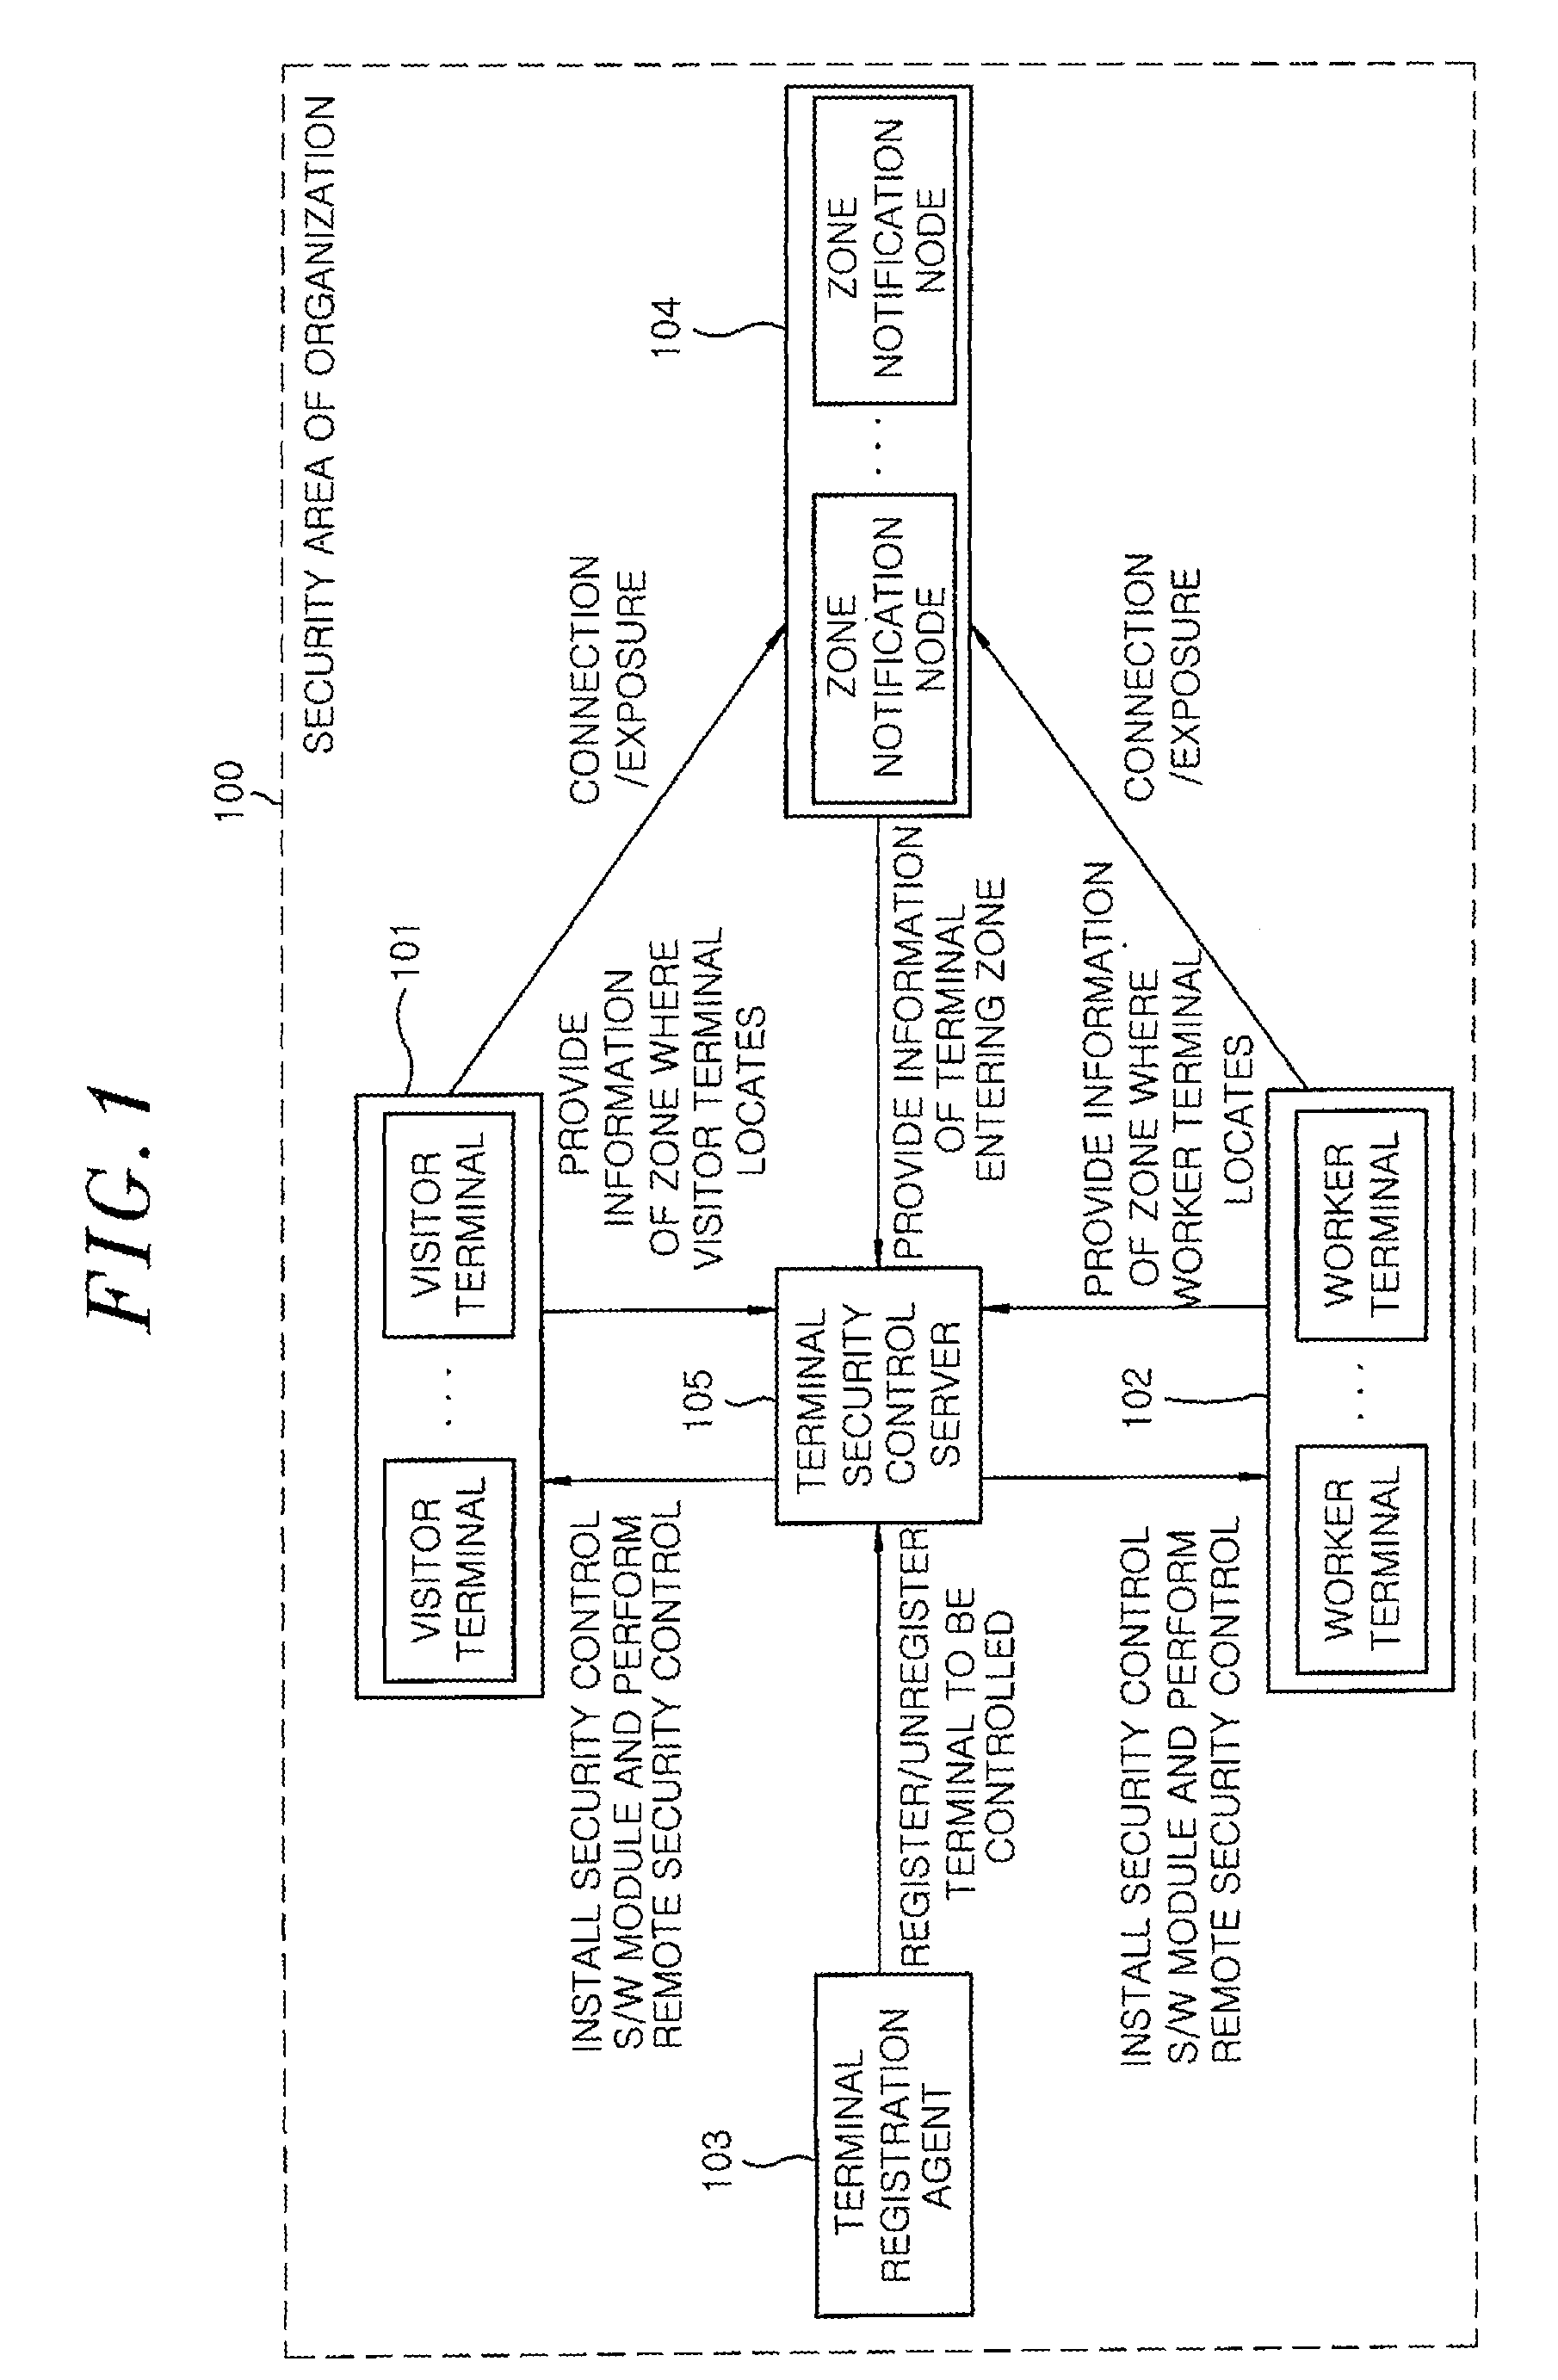 Security control system and method for personal communication terminals